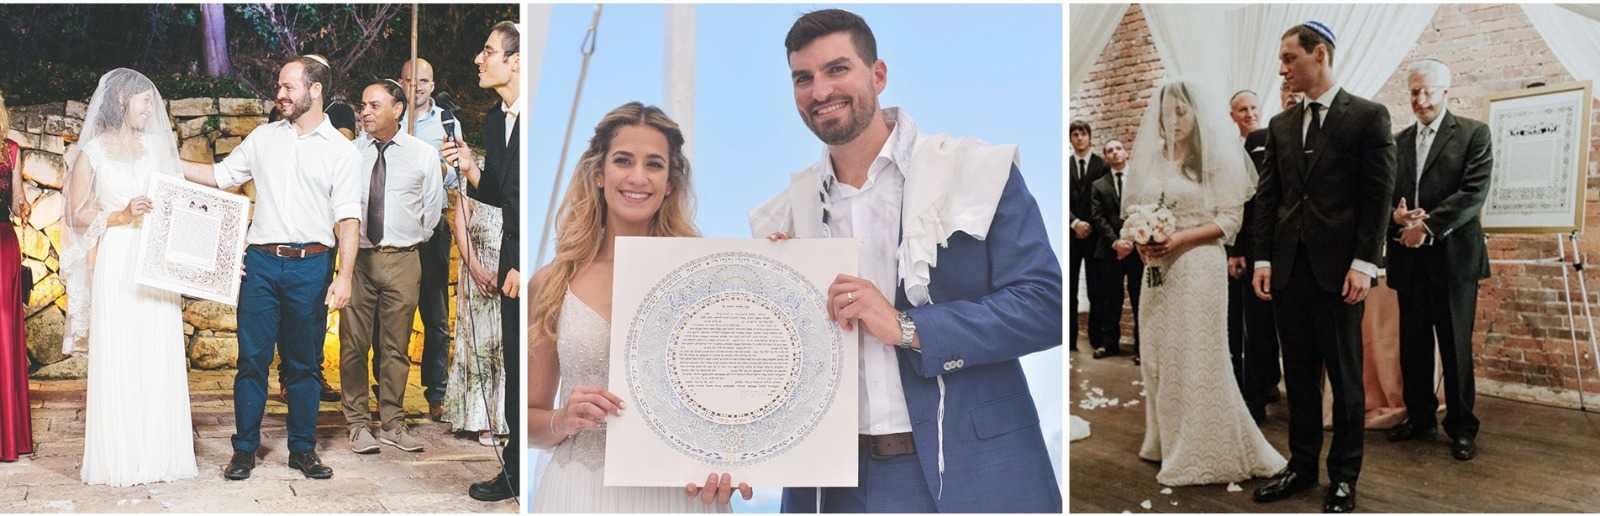 Wedding vows from a ketubah studio